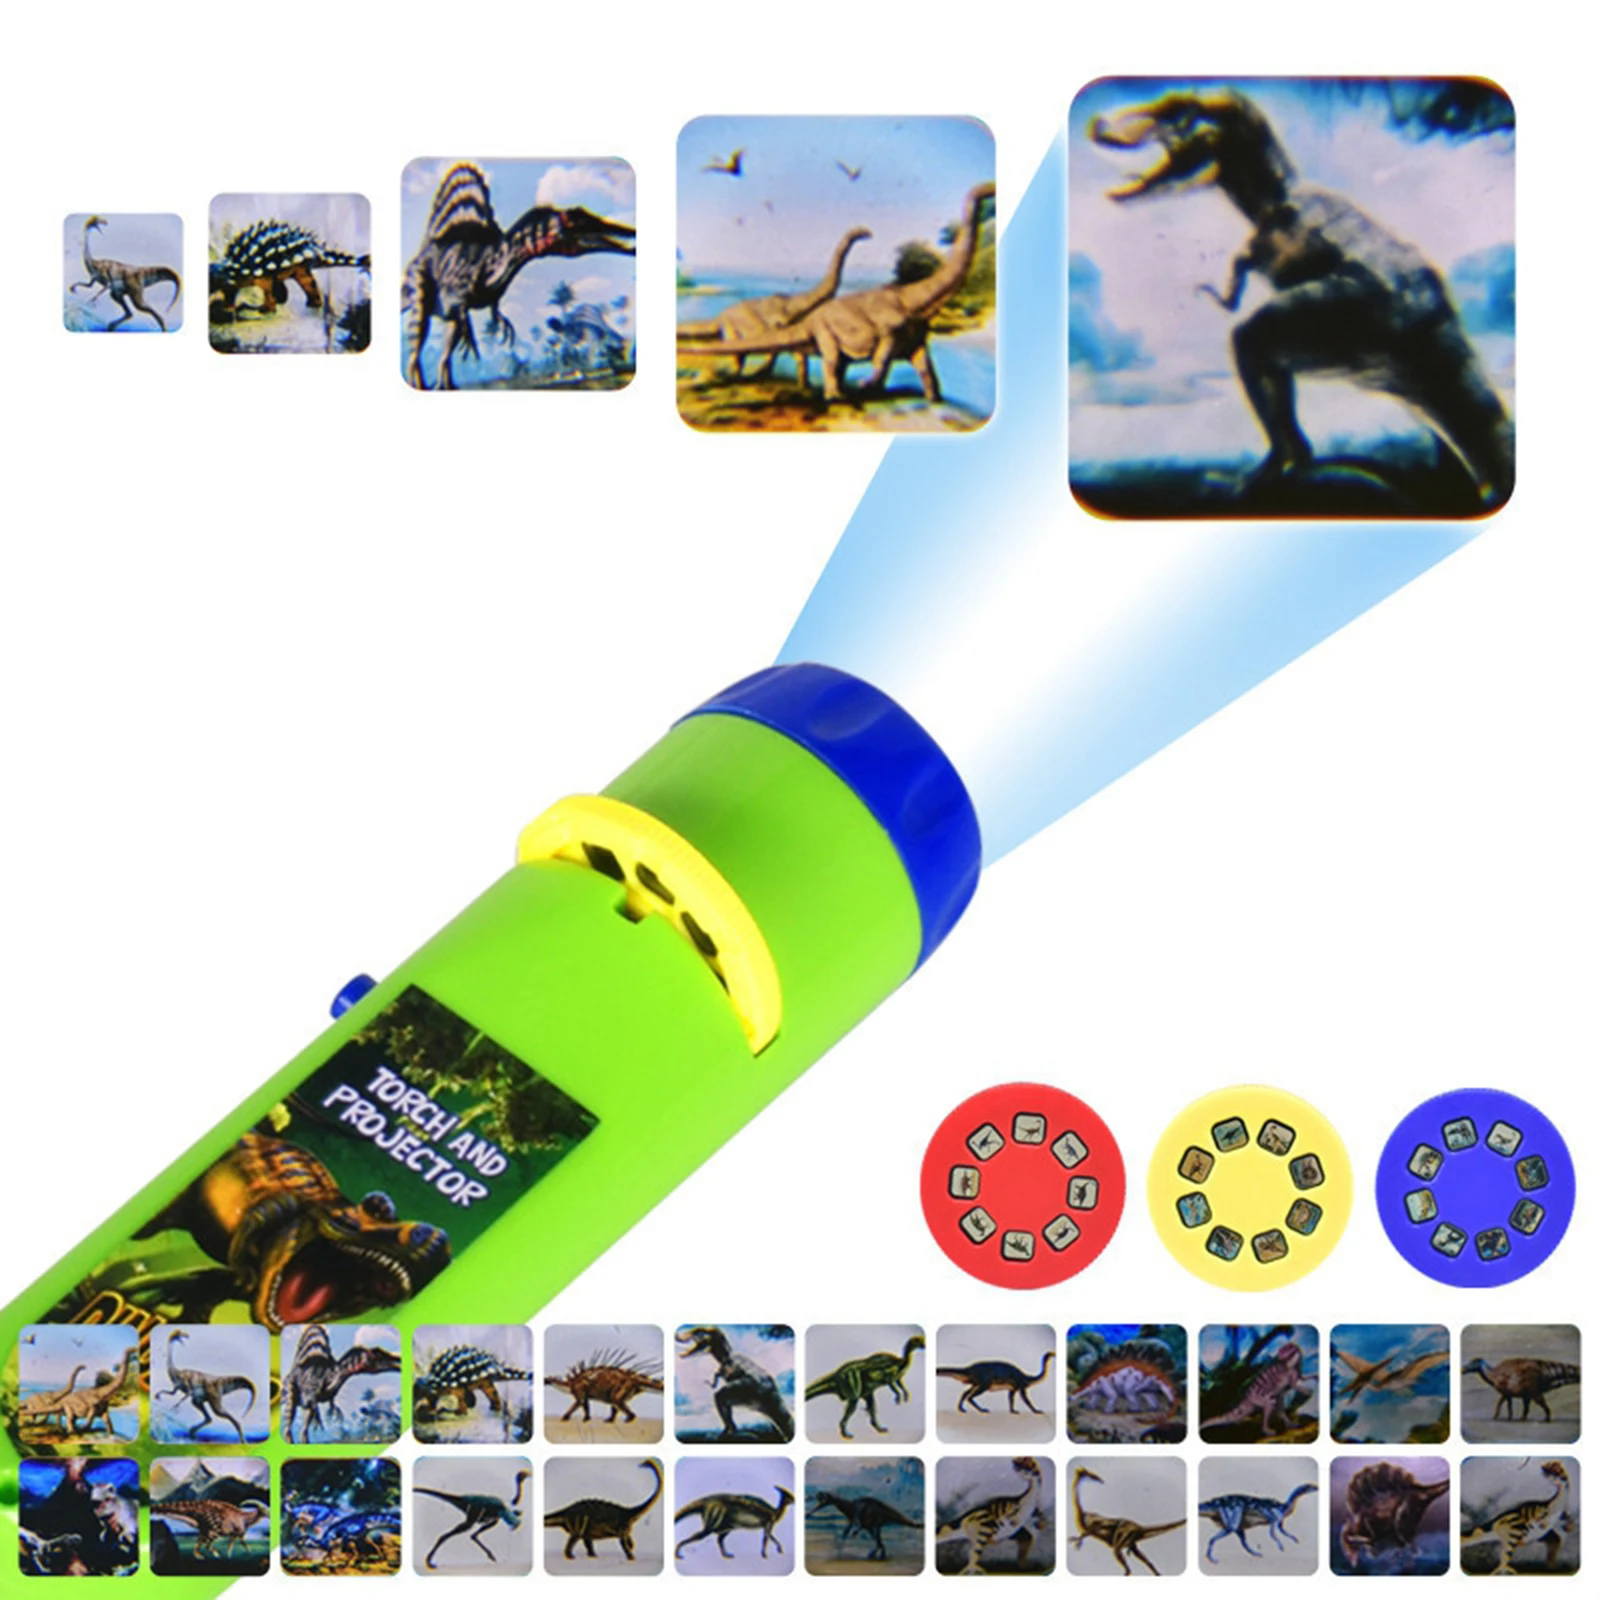 

Parent-child Interaction Puzzle Early Education Luminous Dinosaur Toy Ocean Animal Child Slide Projector Lamp Kids Toys Gift